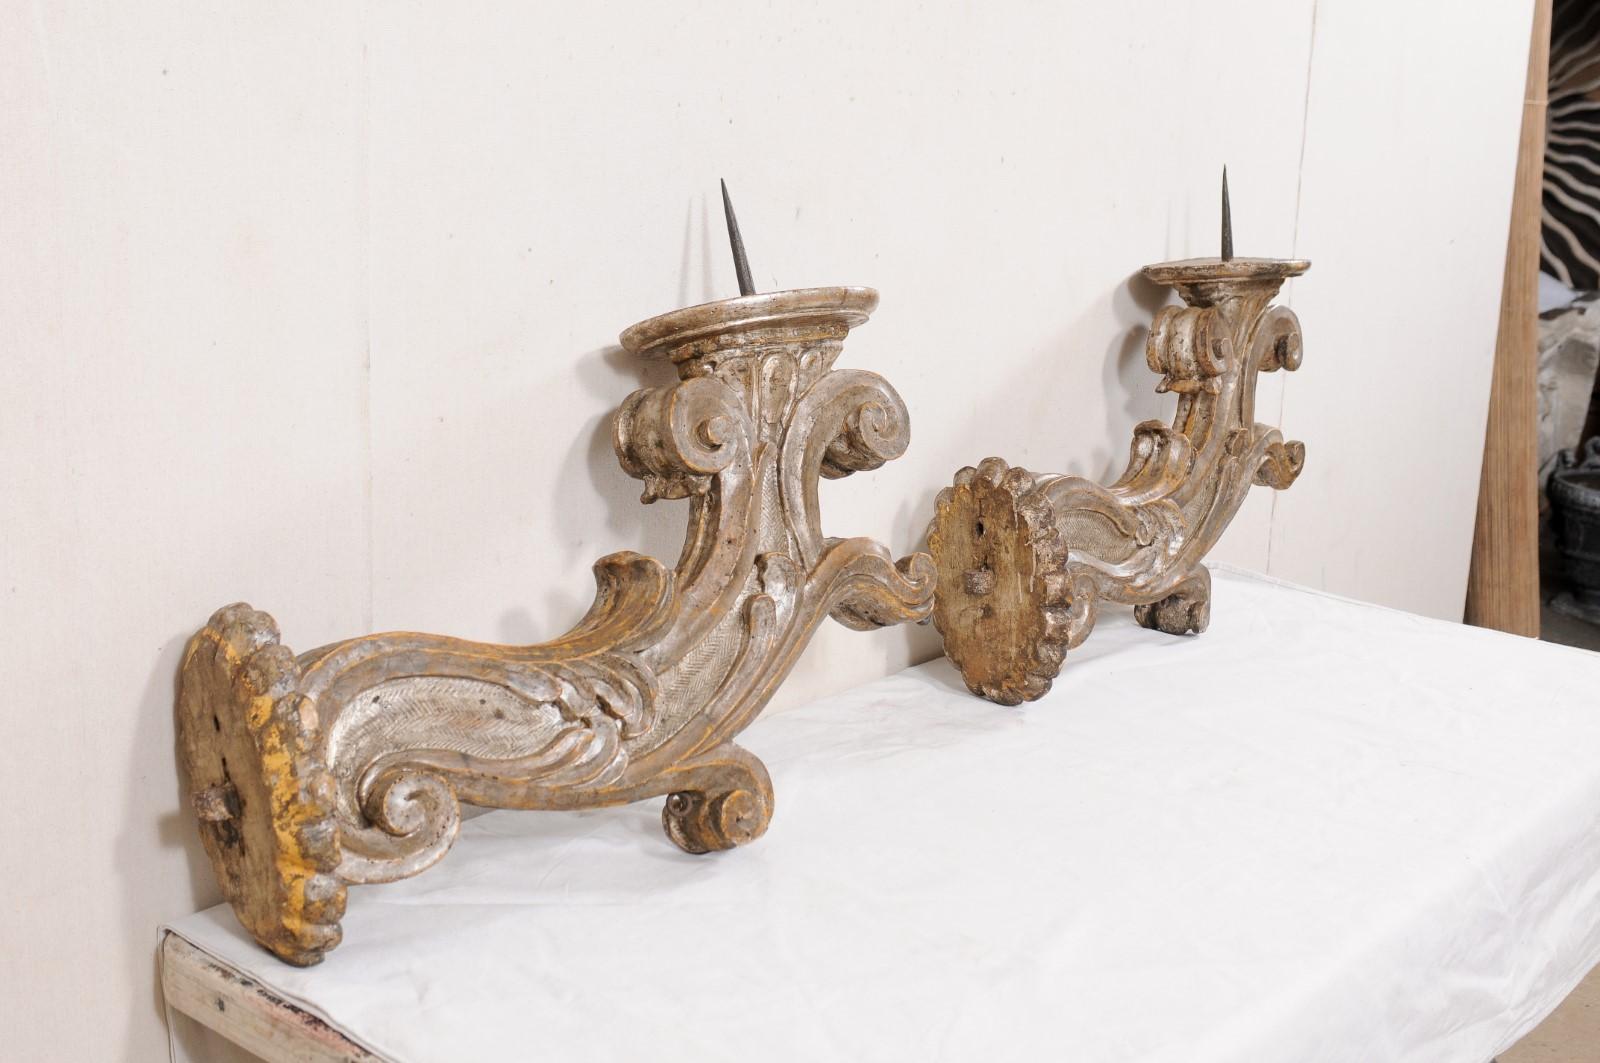 A large Italian pair of carved-wood pricket sconces from the 18th century. This antique pair of candle sconces from Italy have been carved with flower scalloped backplate at wall, which projects outward into a singular, and robust arm carved in an